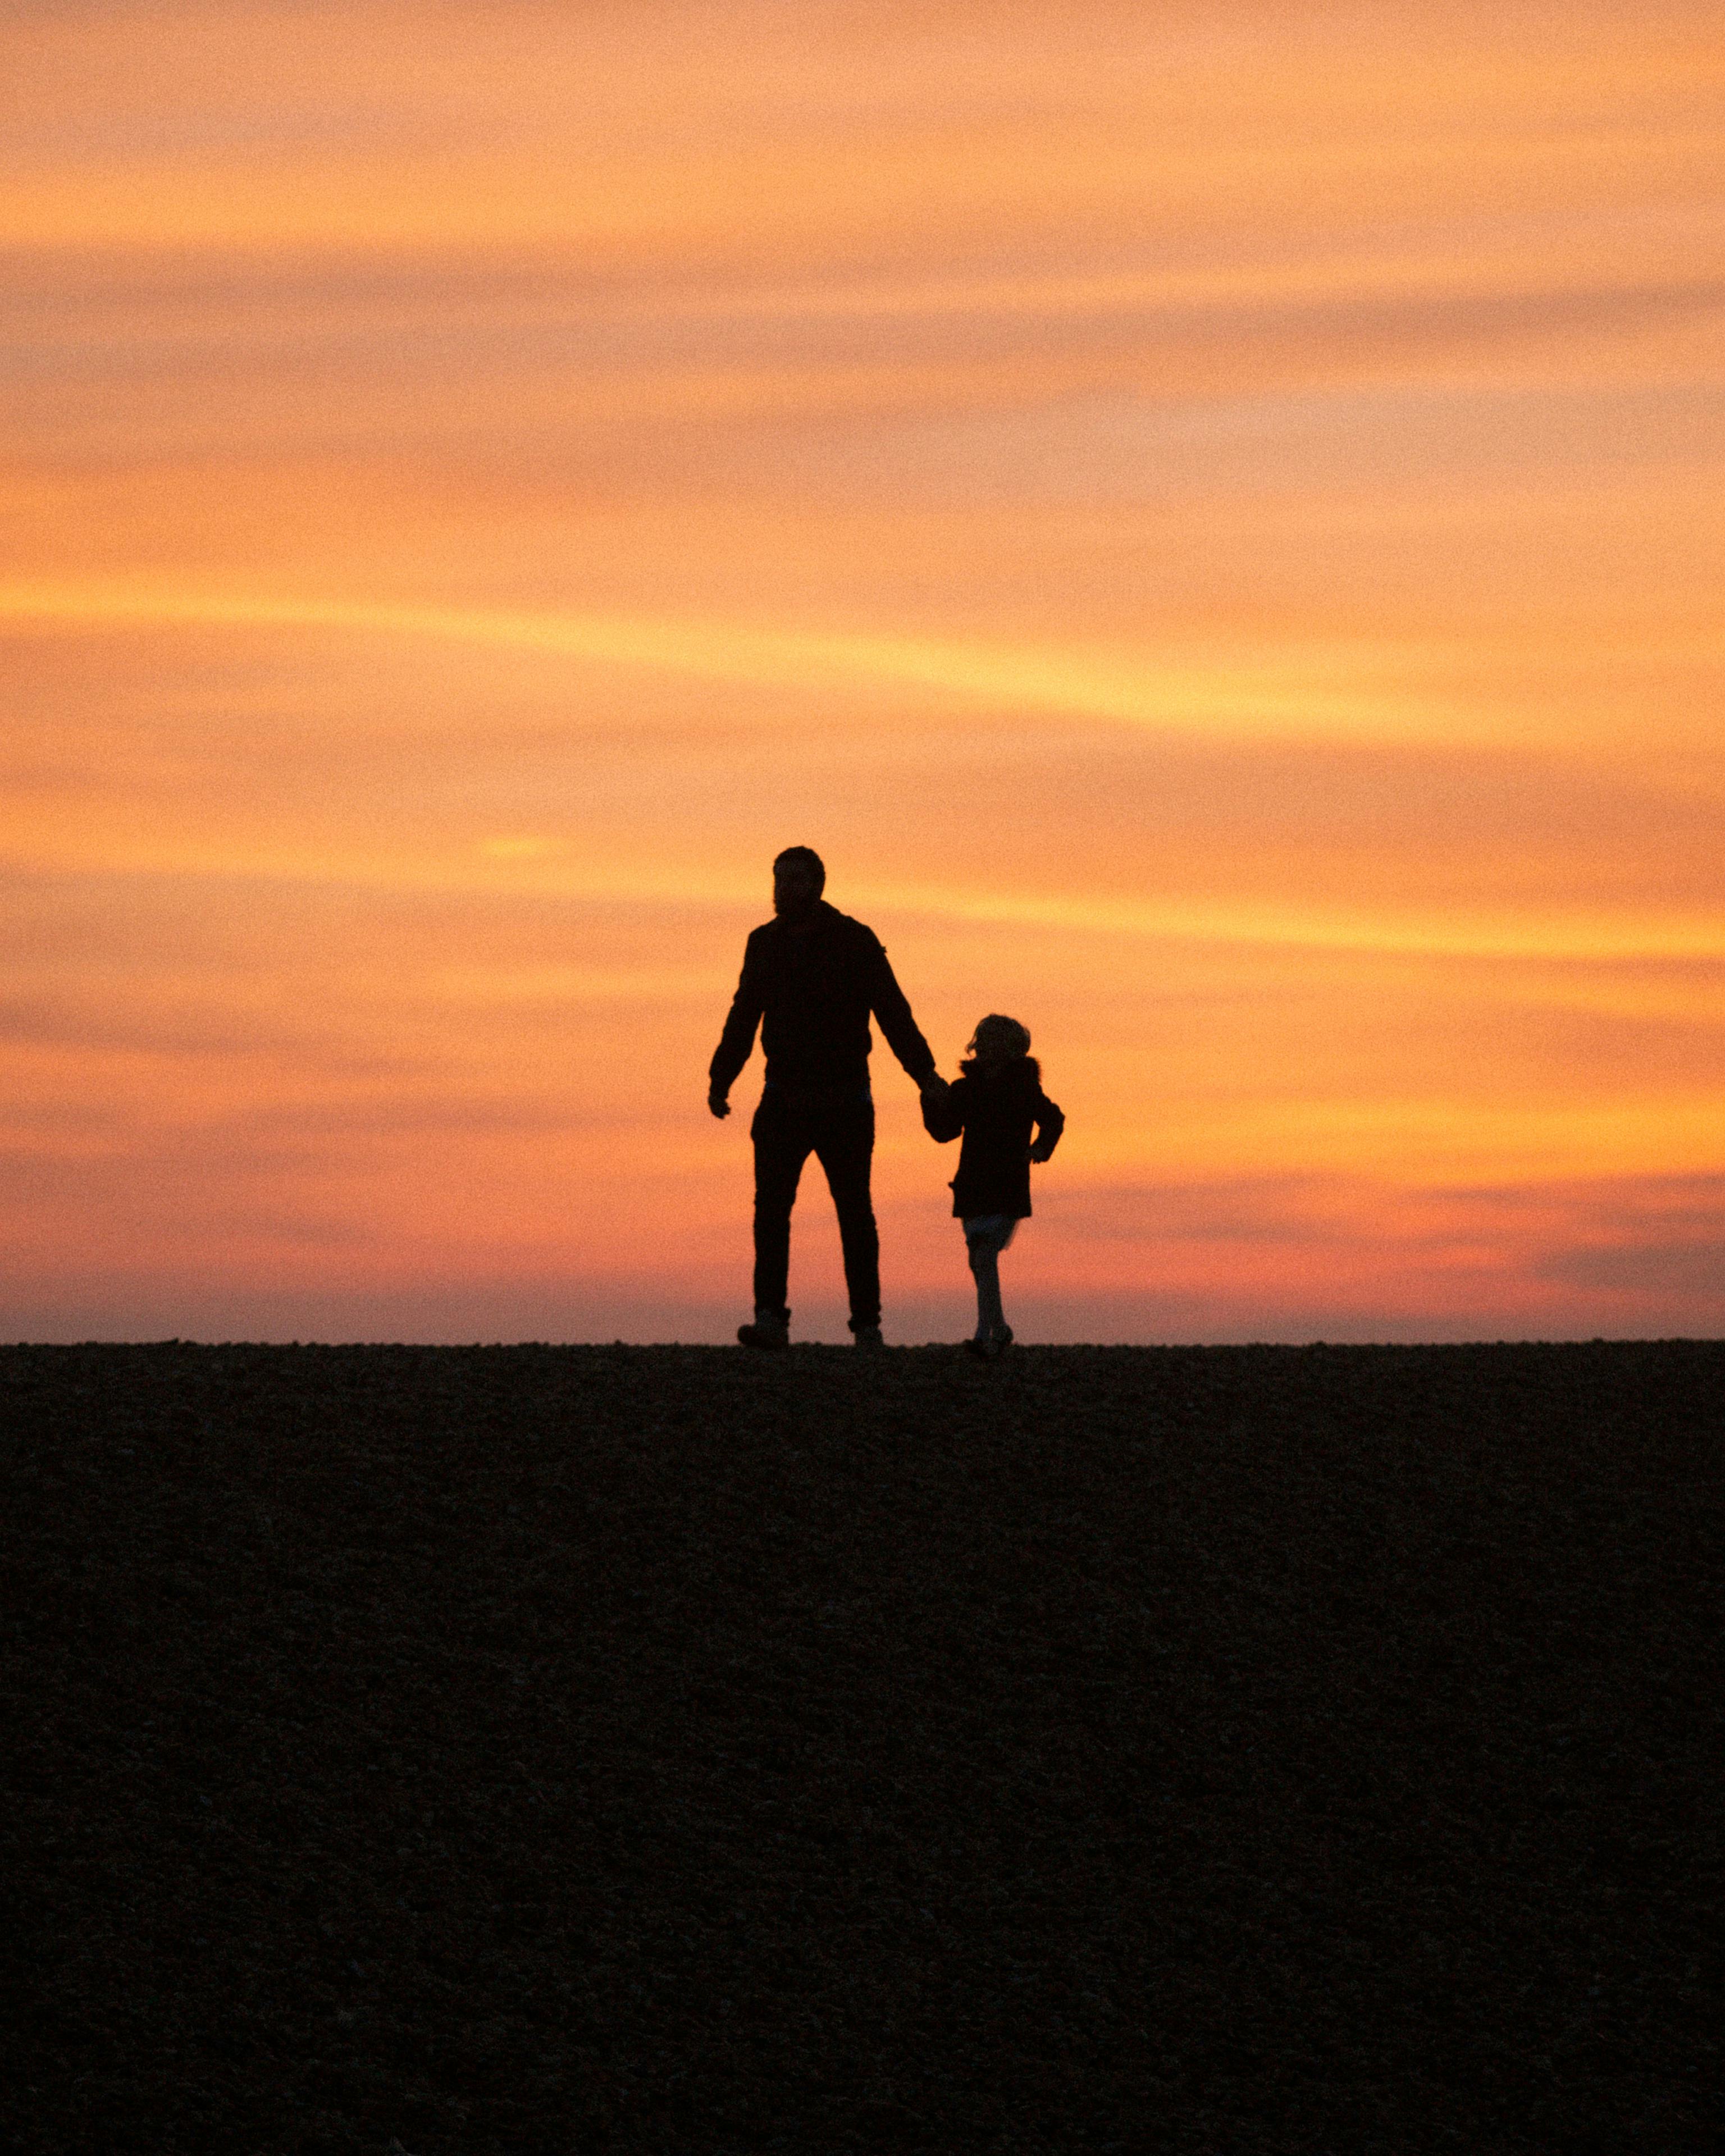 Father and daughter | Source: Pexels